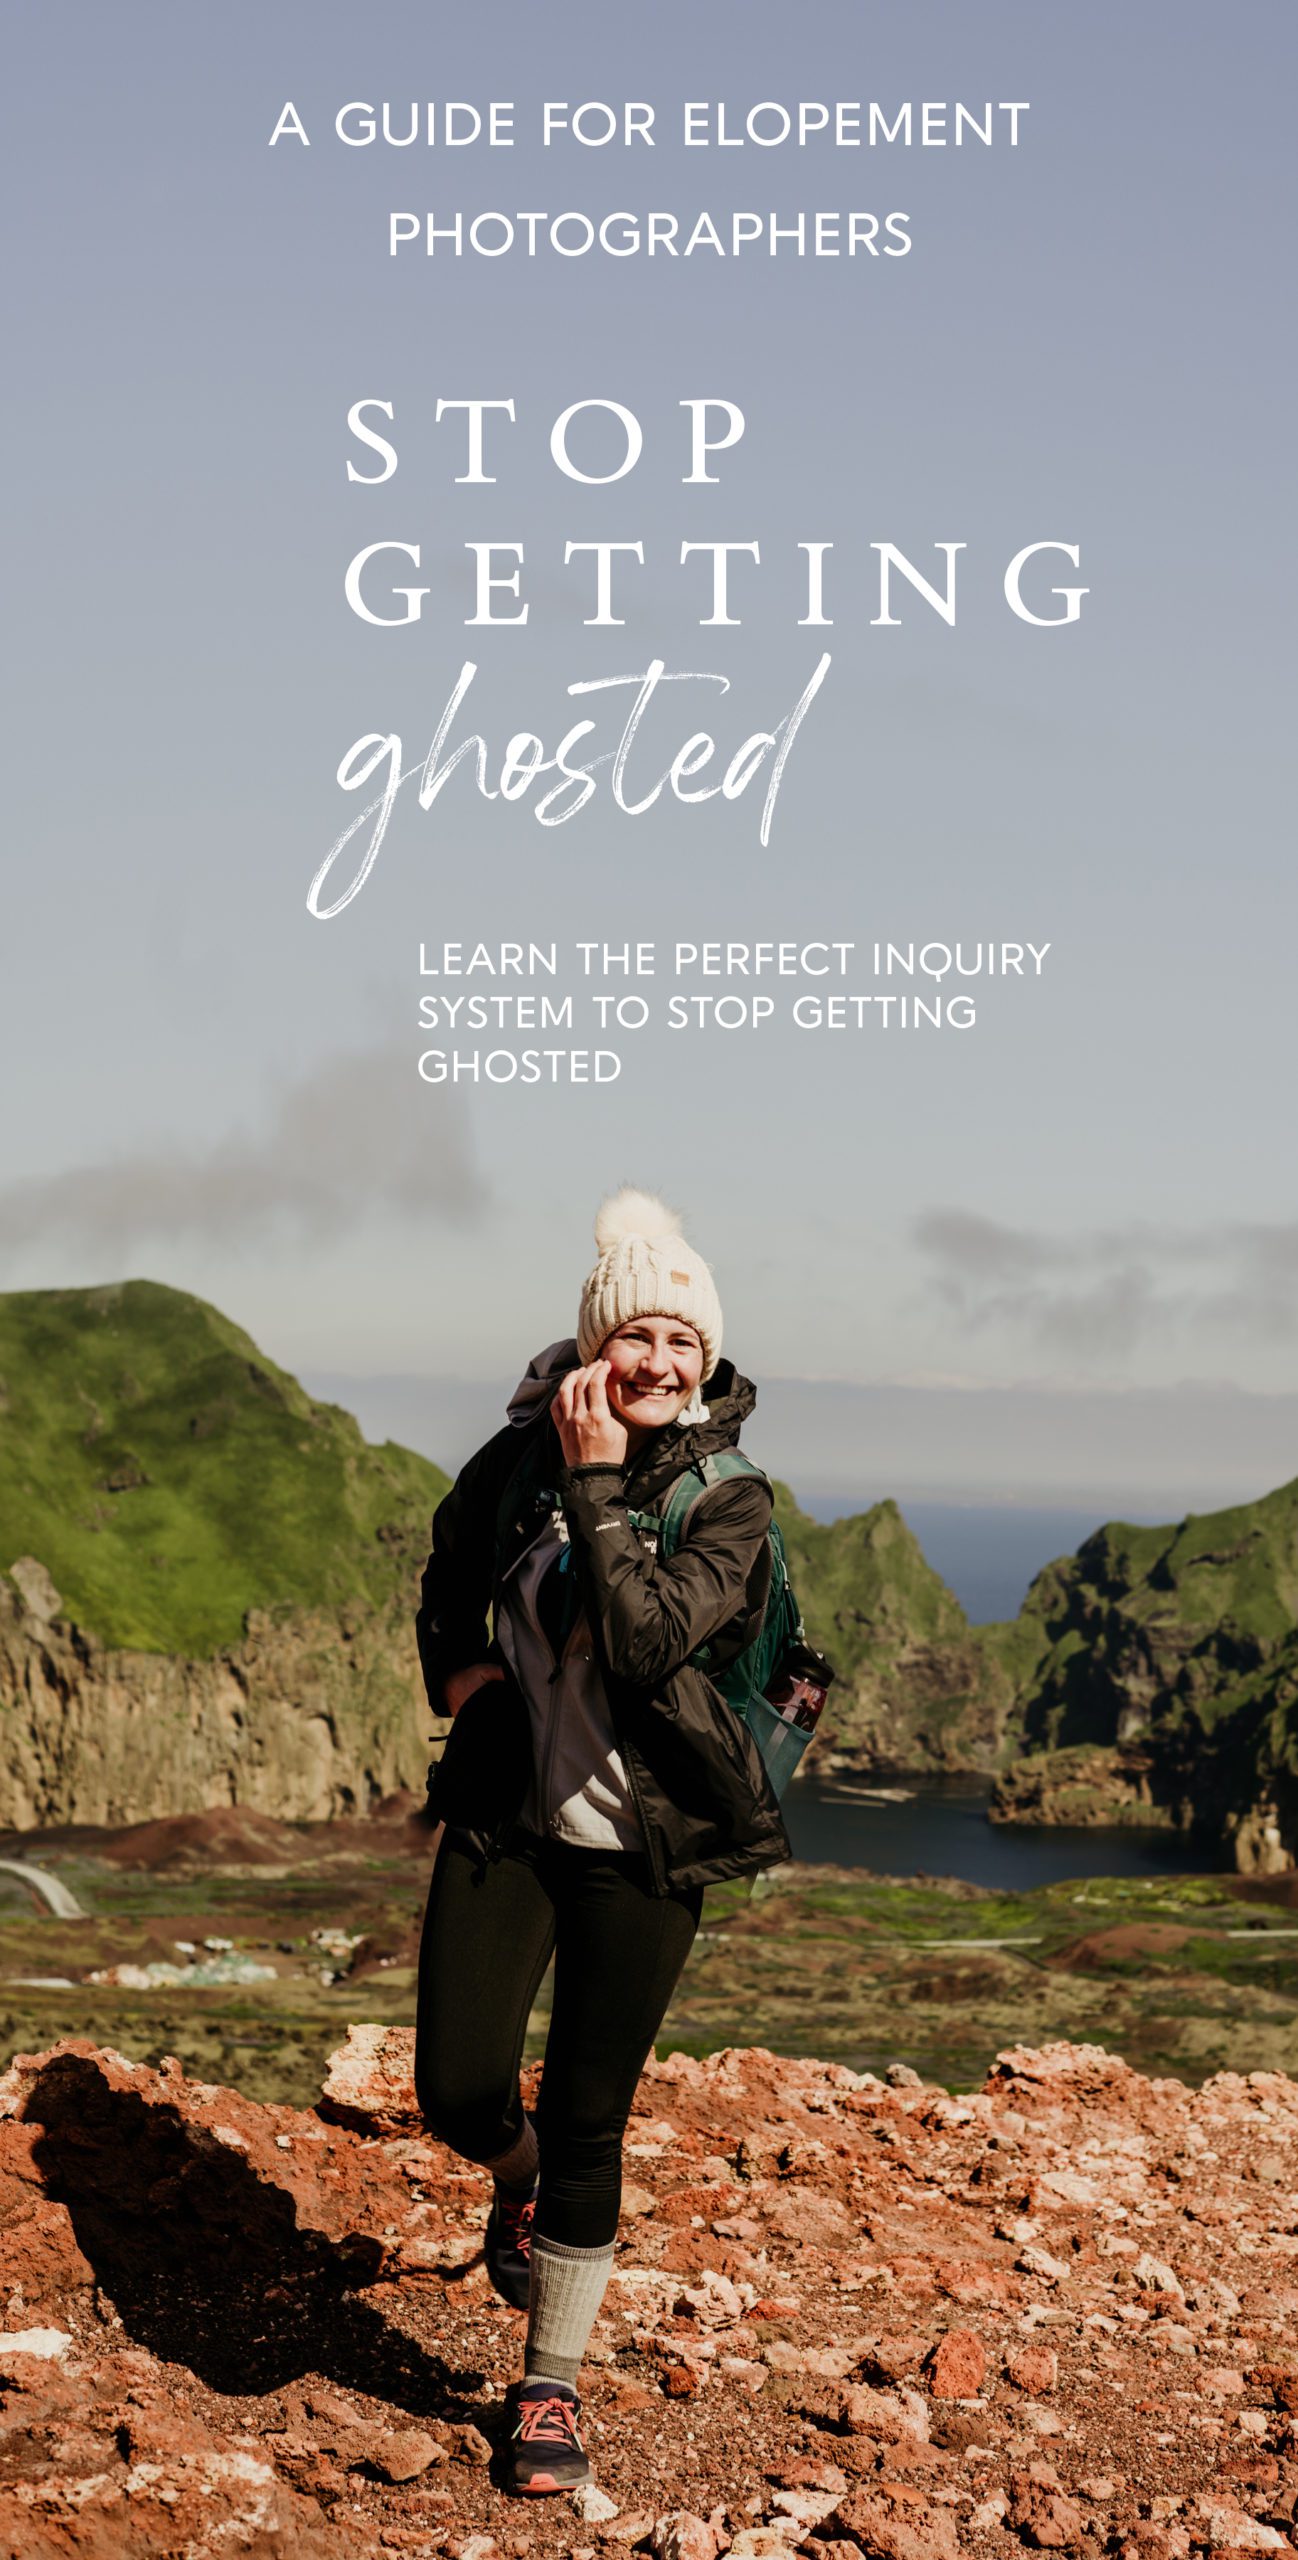 In part two of series on the Ultimate Guide to Book the Elopement You Want, learn the PERFECT INQUIRY SYSTEM to stop getting ghosted.